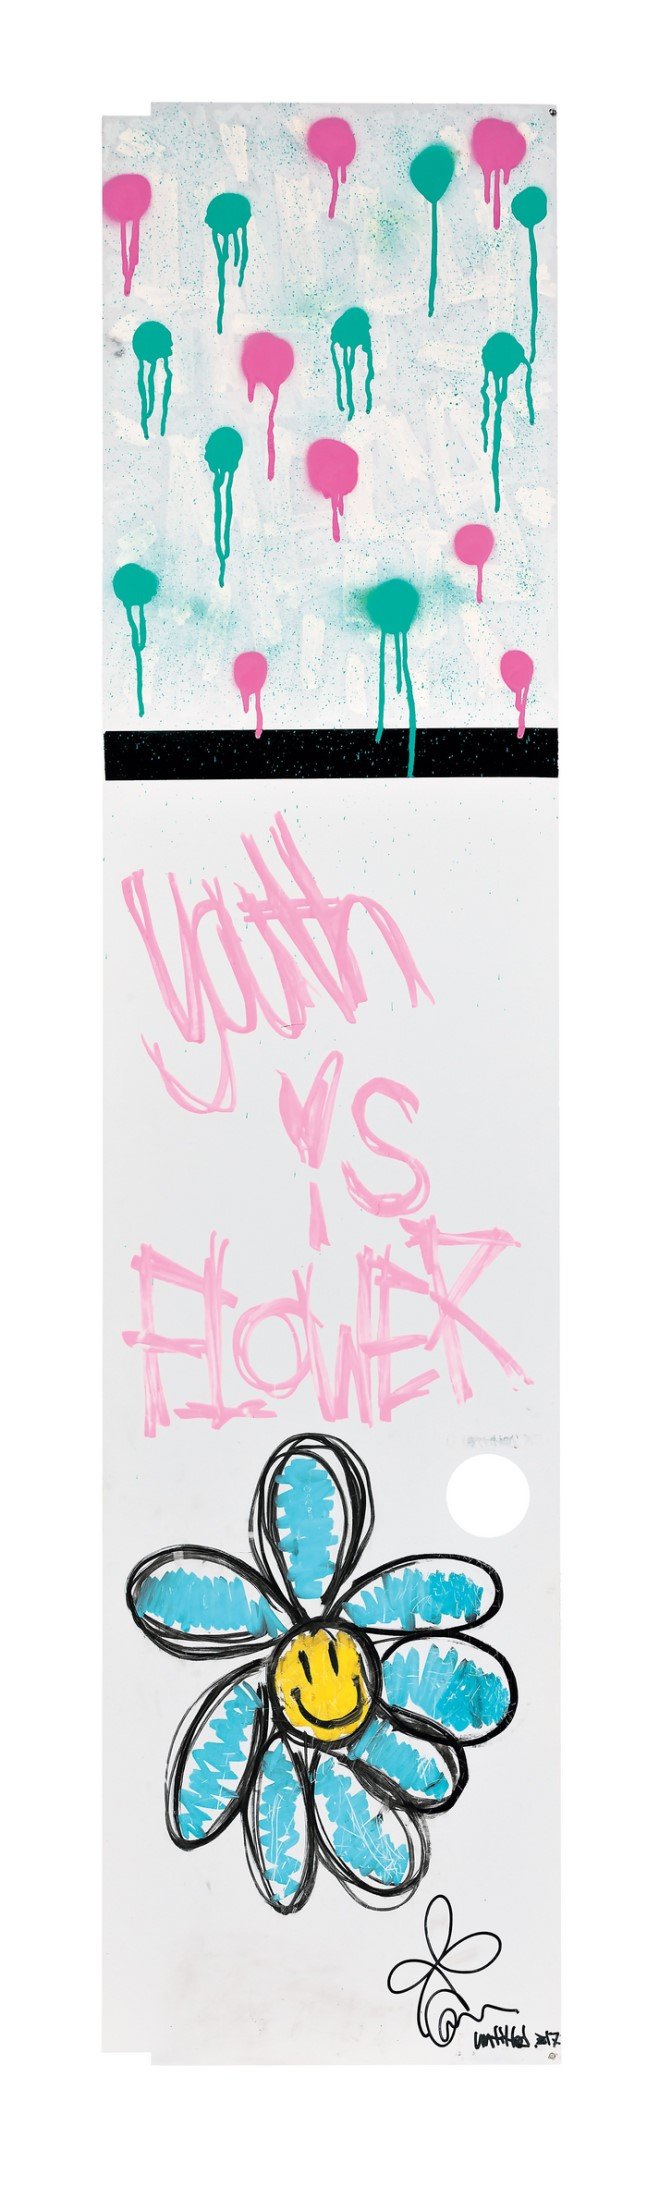 권지용(G-DRAGON)의 ‘Youth is Flower’ &#x2F; 사진&#x3D;뉴시스